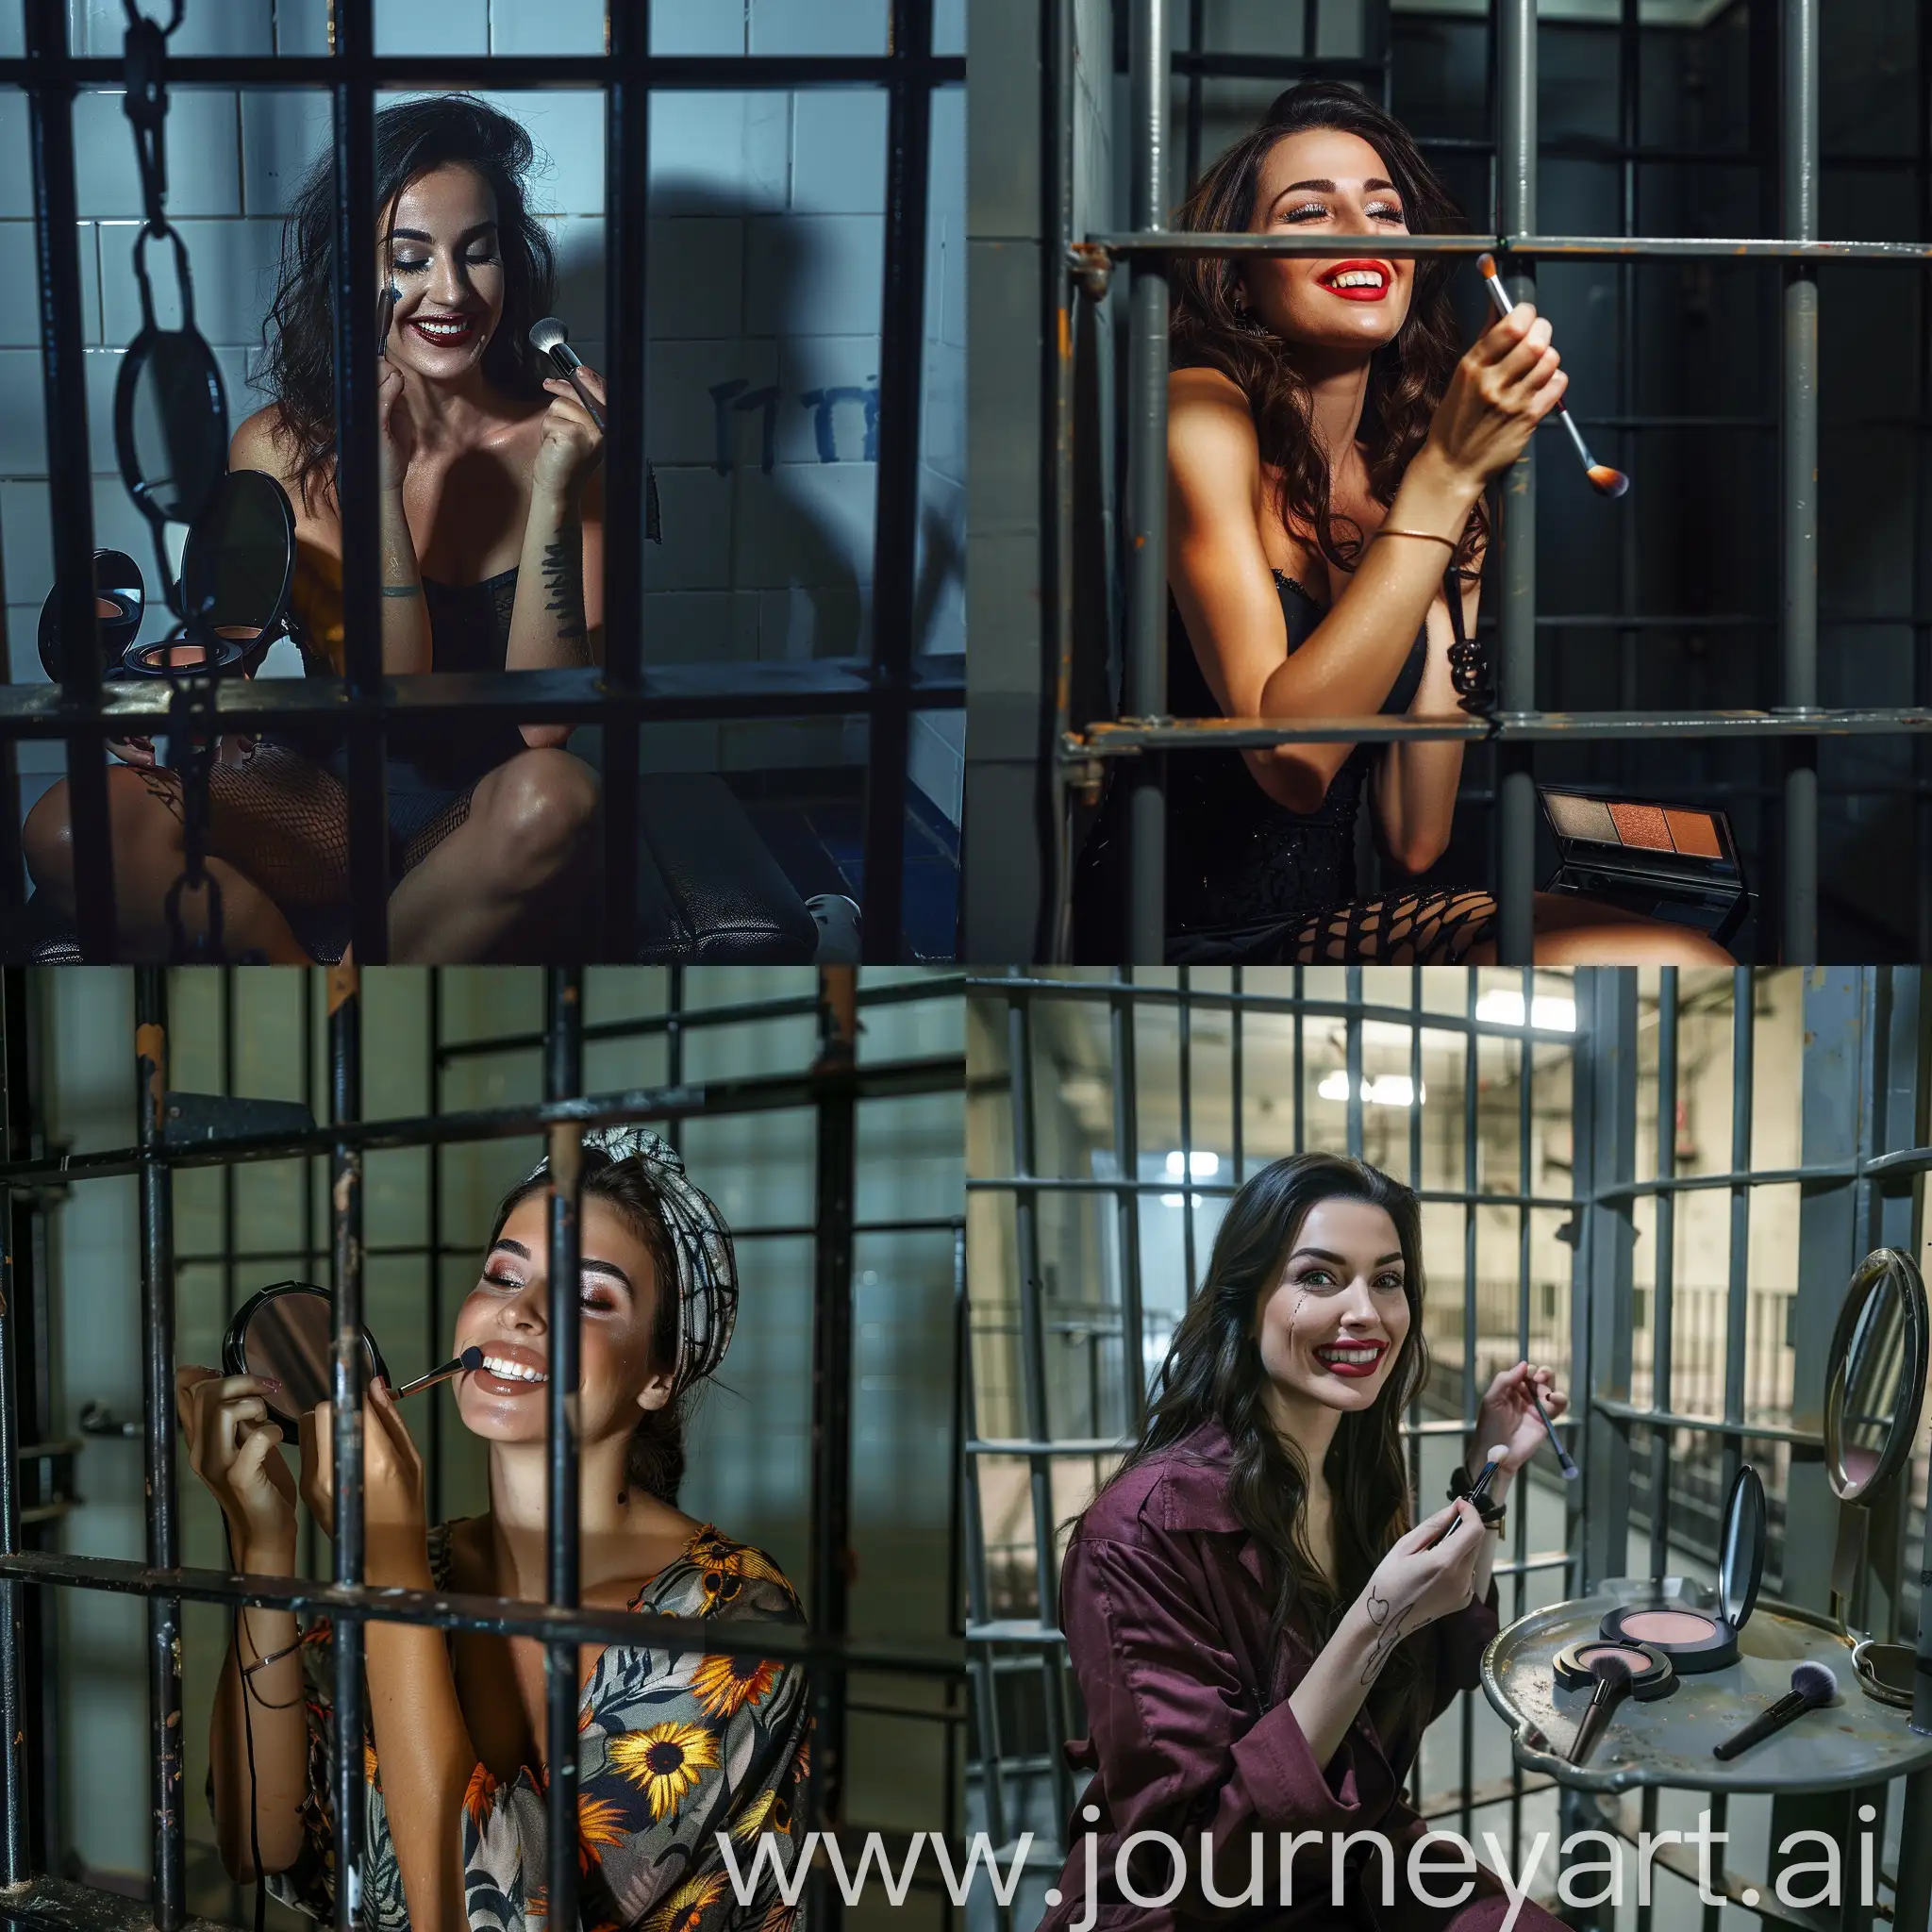 Joyful-Makeup-Session-in-a-Prison-Cell